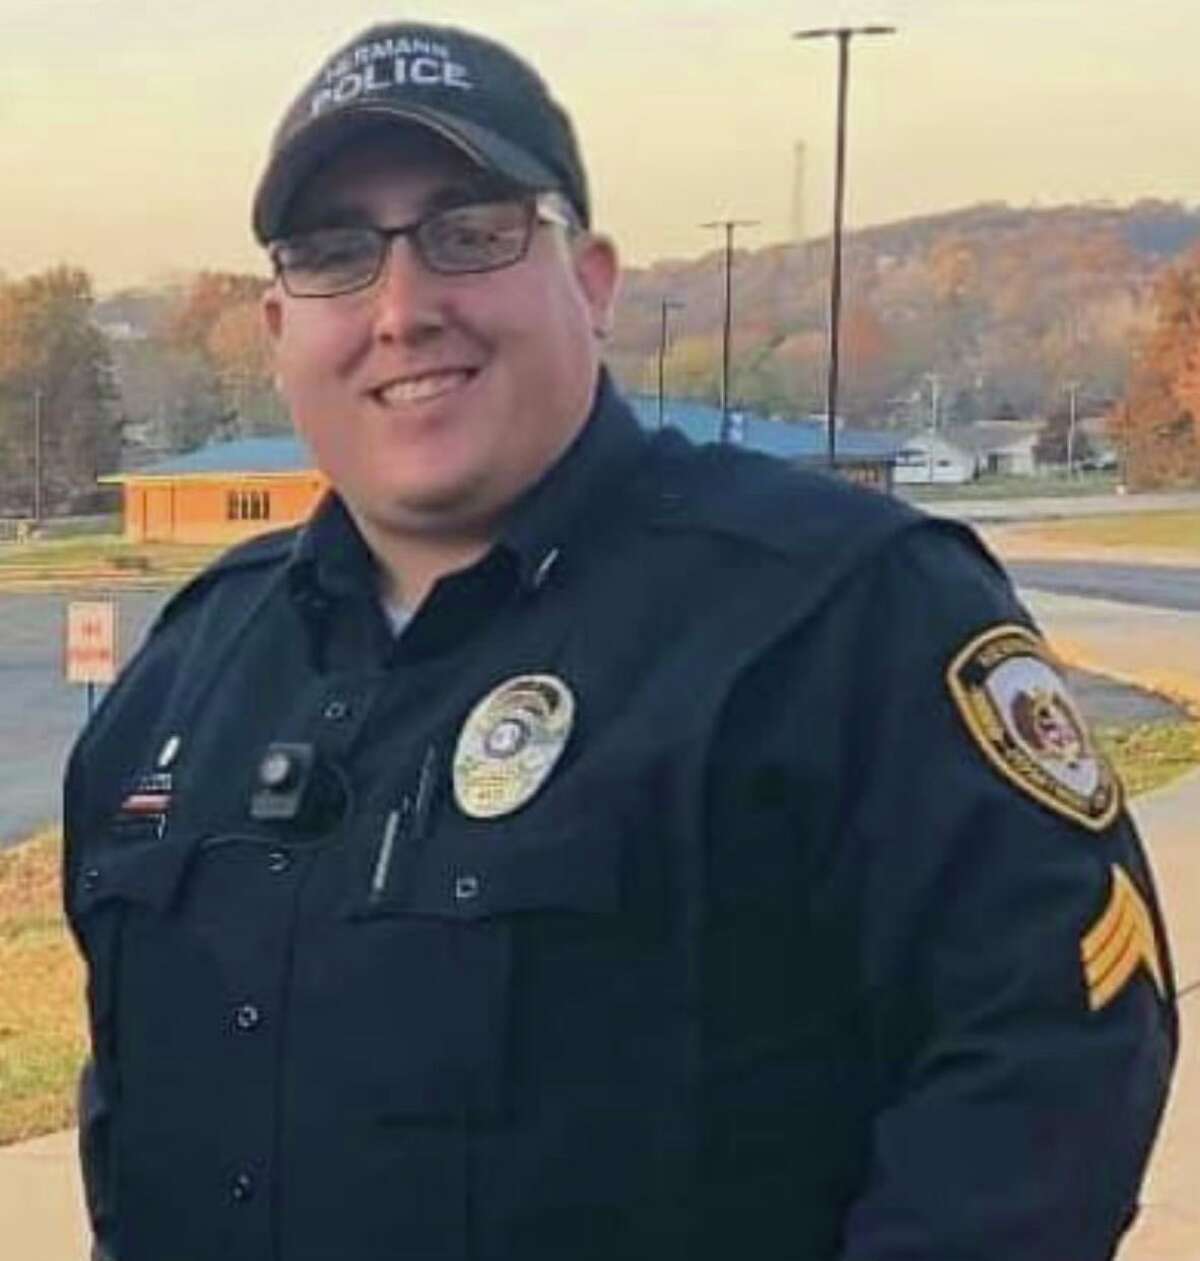 Detective Sergeant Mason Griffith of the Hermann, Missouri Police Department was shot and killed following a gas station robbery.